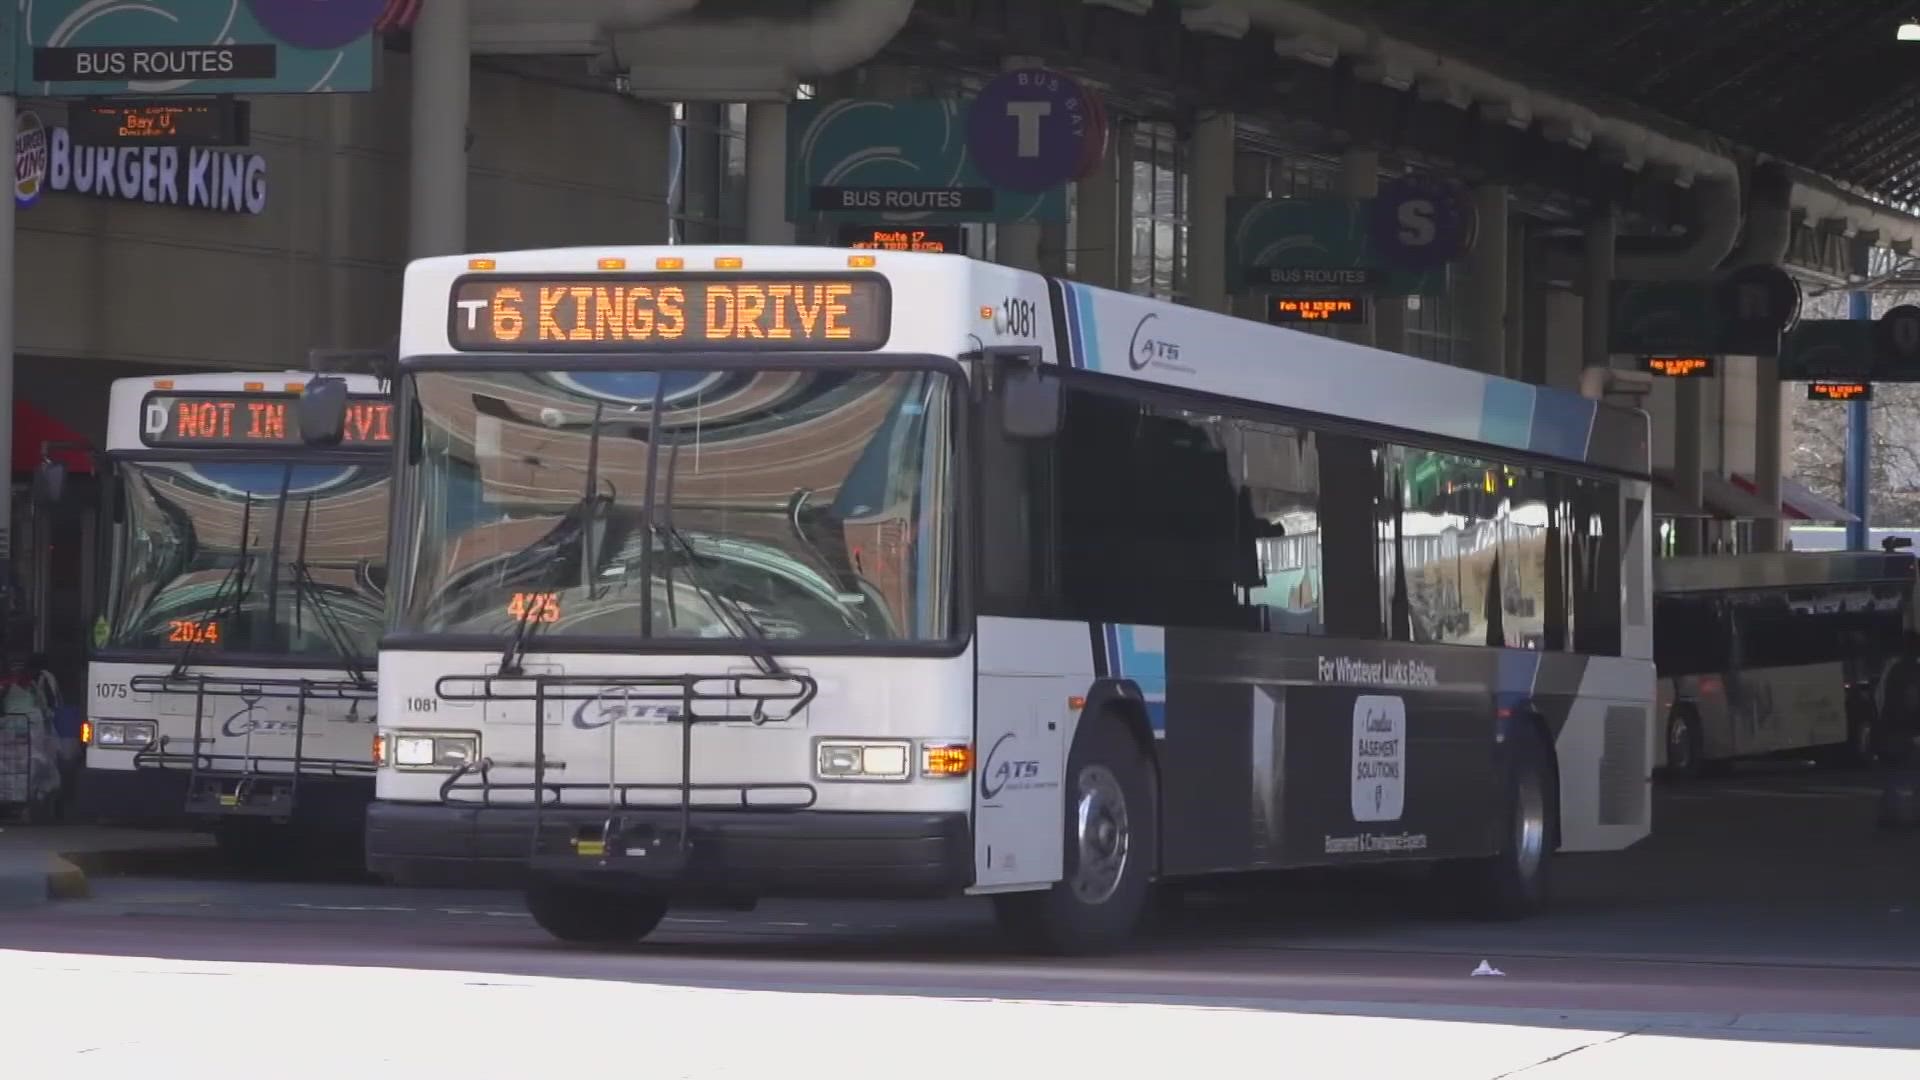 The union representing CATS bus drivers has reached a tentative agreement to avoid a potential strike and service disruption, a source tells WCNC Charlotte.